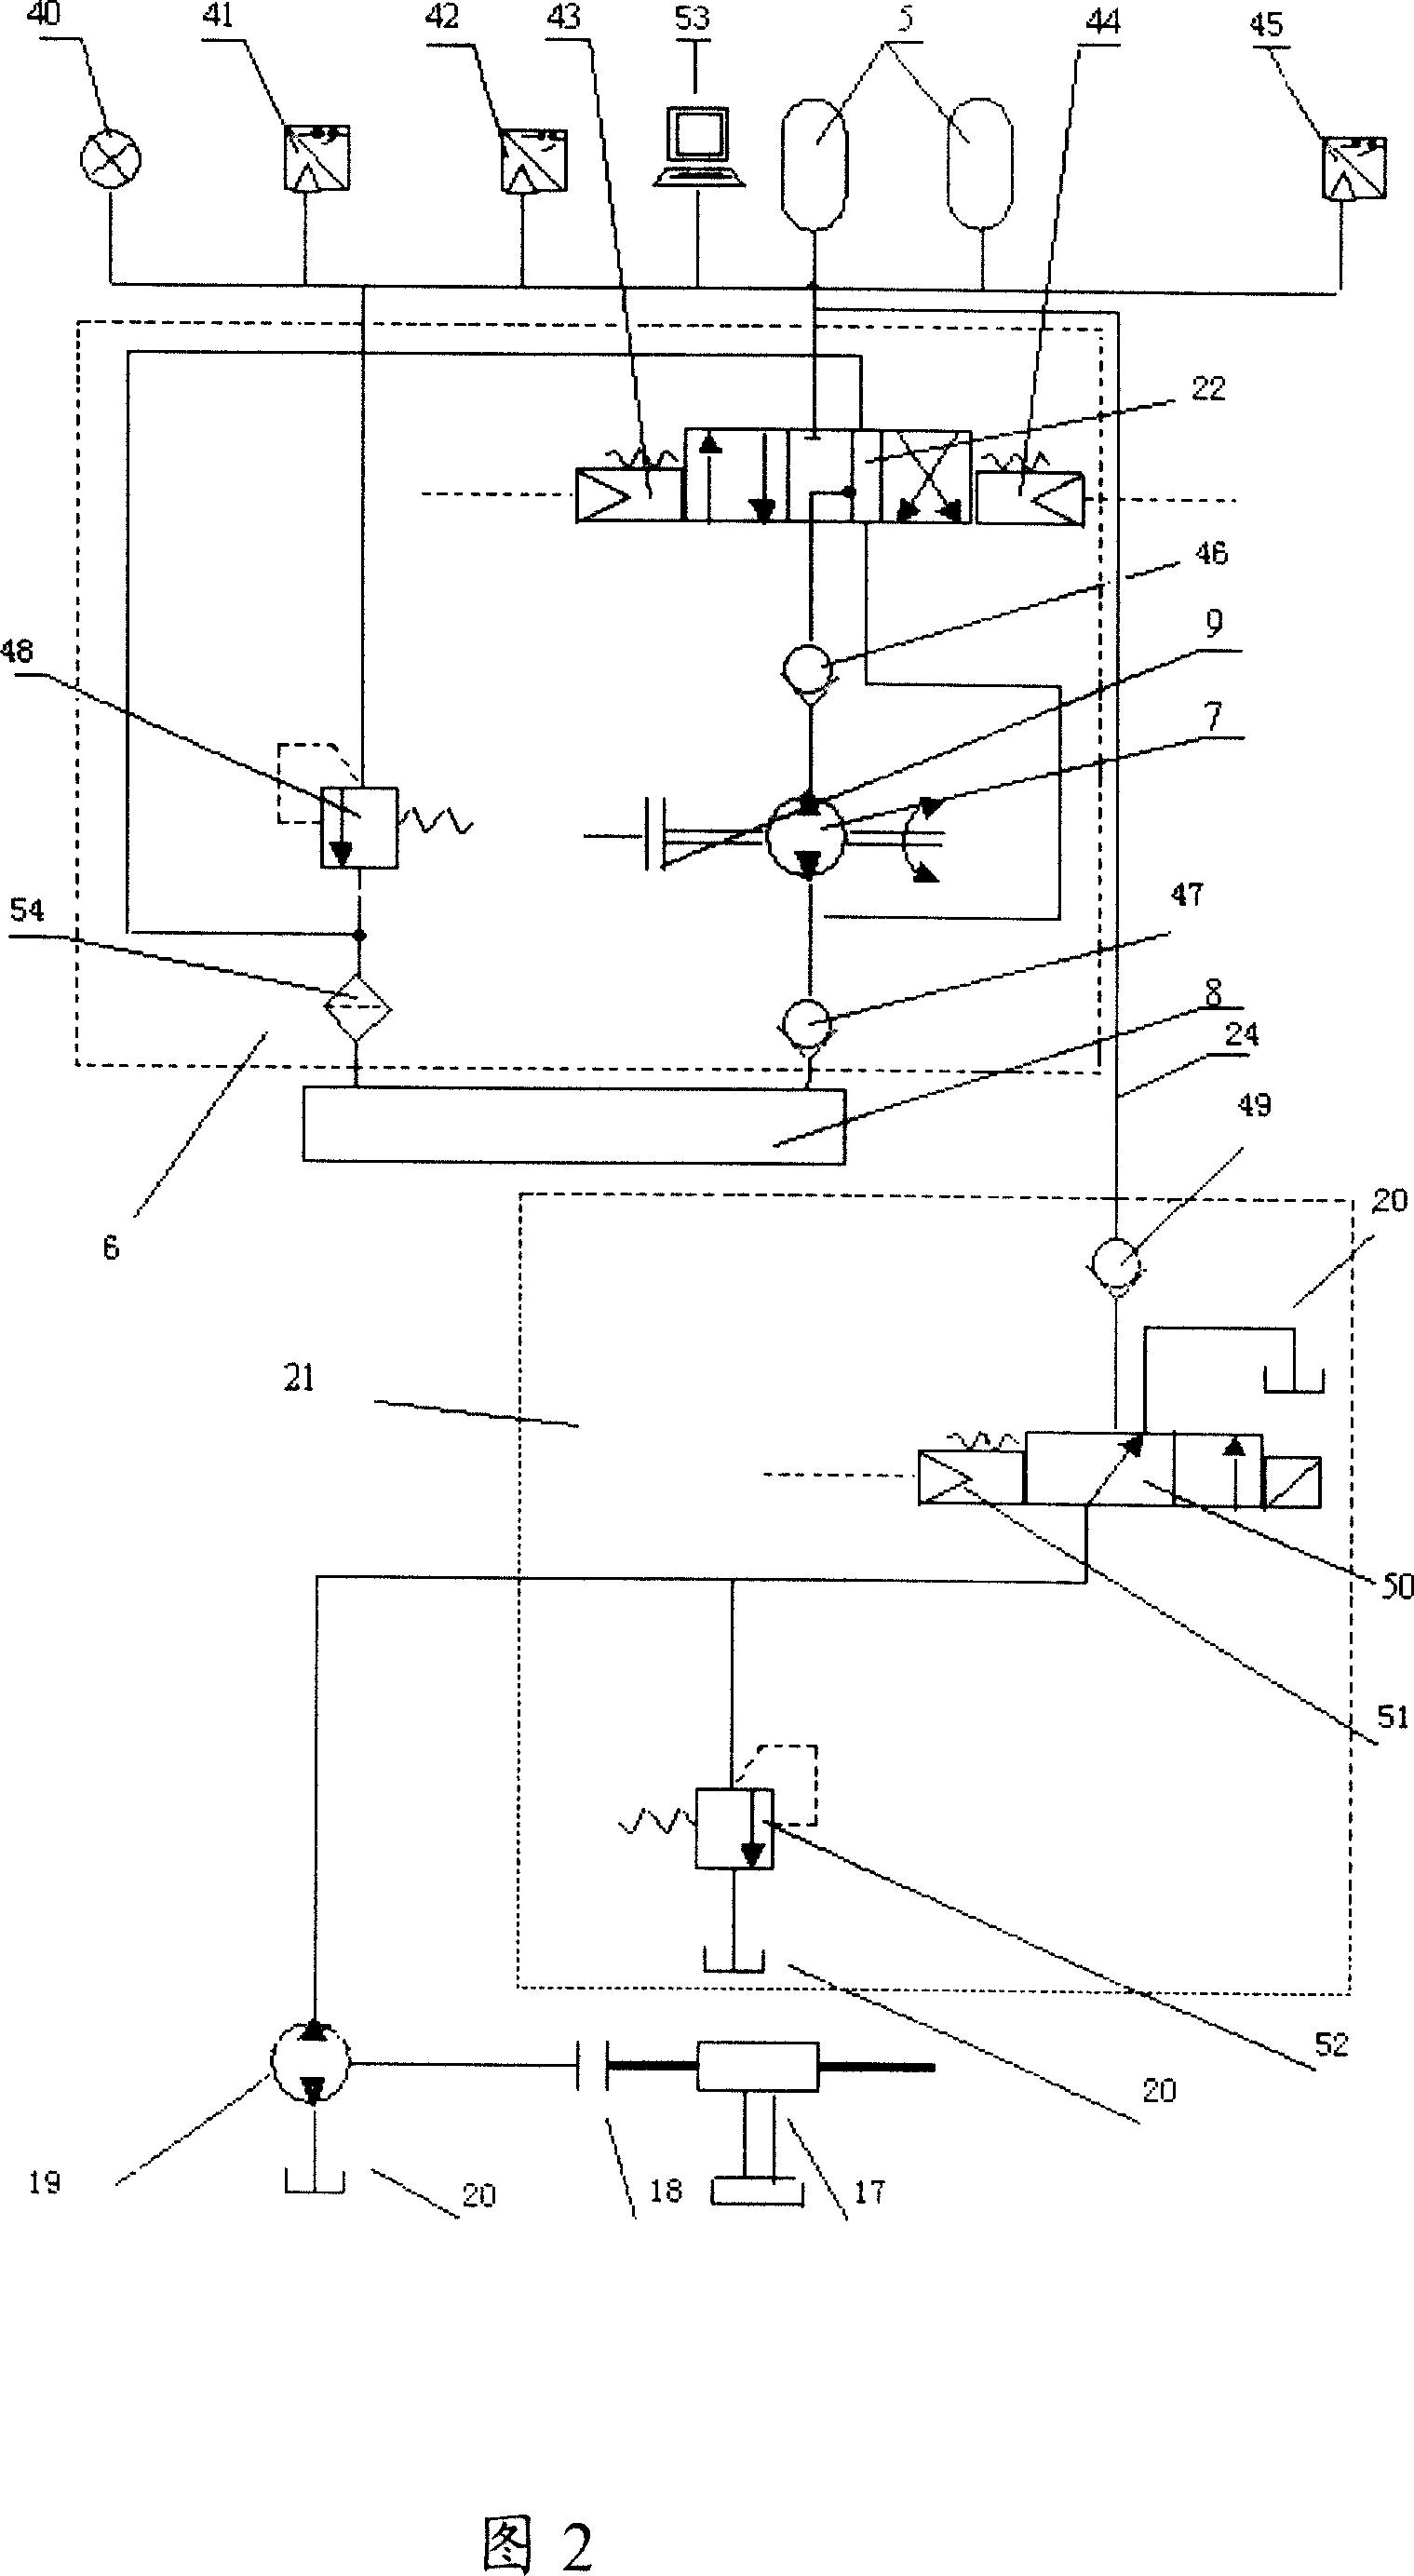 Rear driven mixed power vehicle of motor hydraulic device connection type